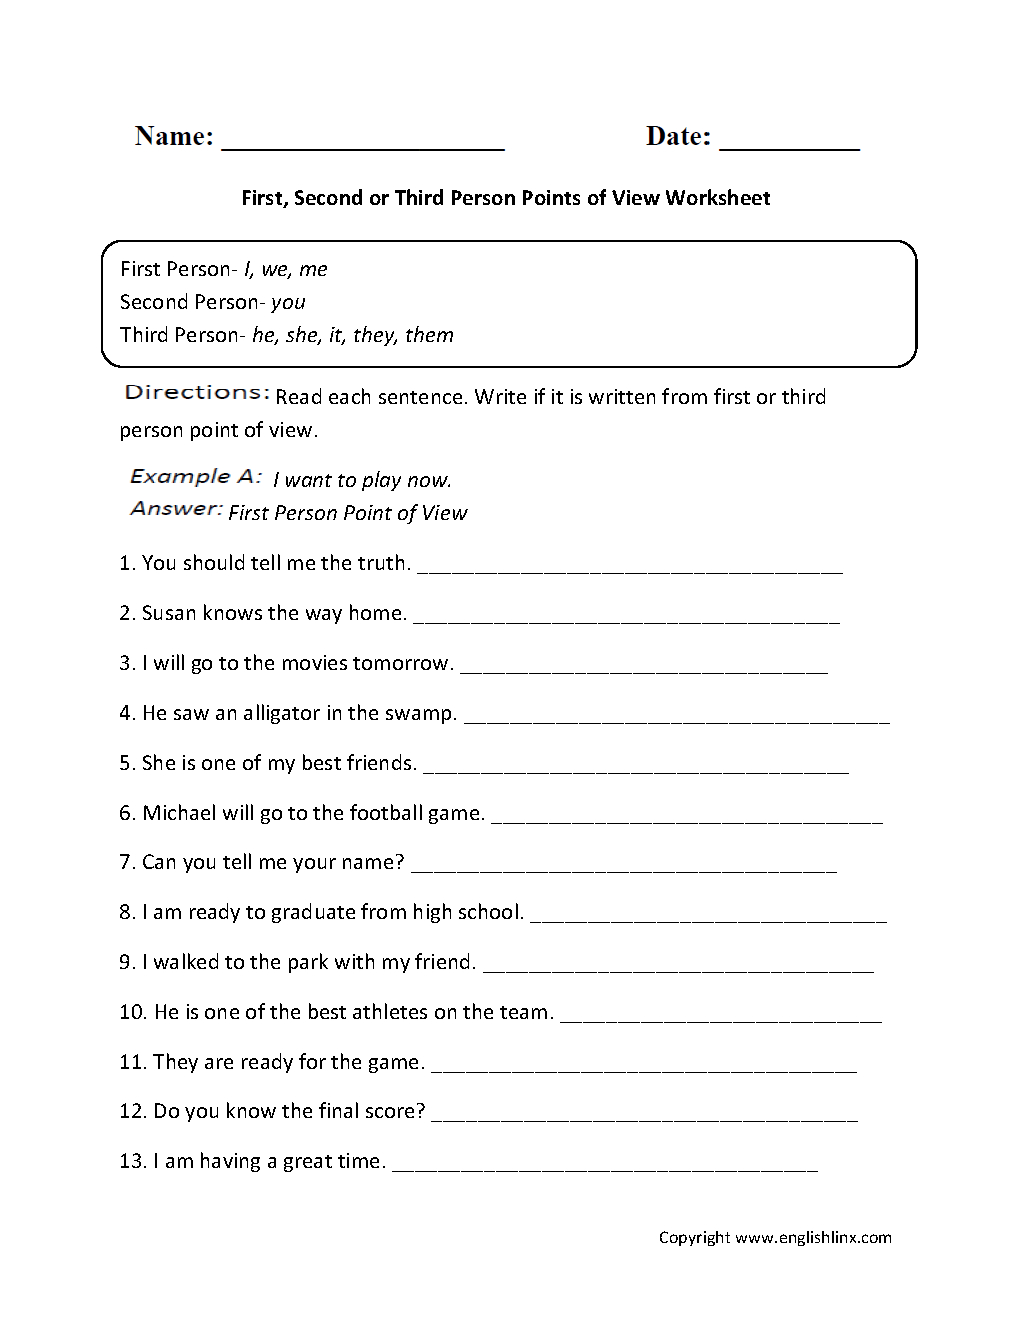 Free Printable 6th Grade English Worksheets Learning How To Read 6th Grade Vocabulary